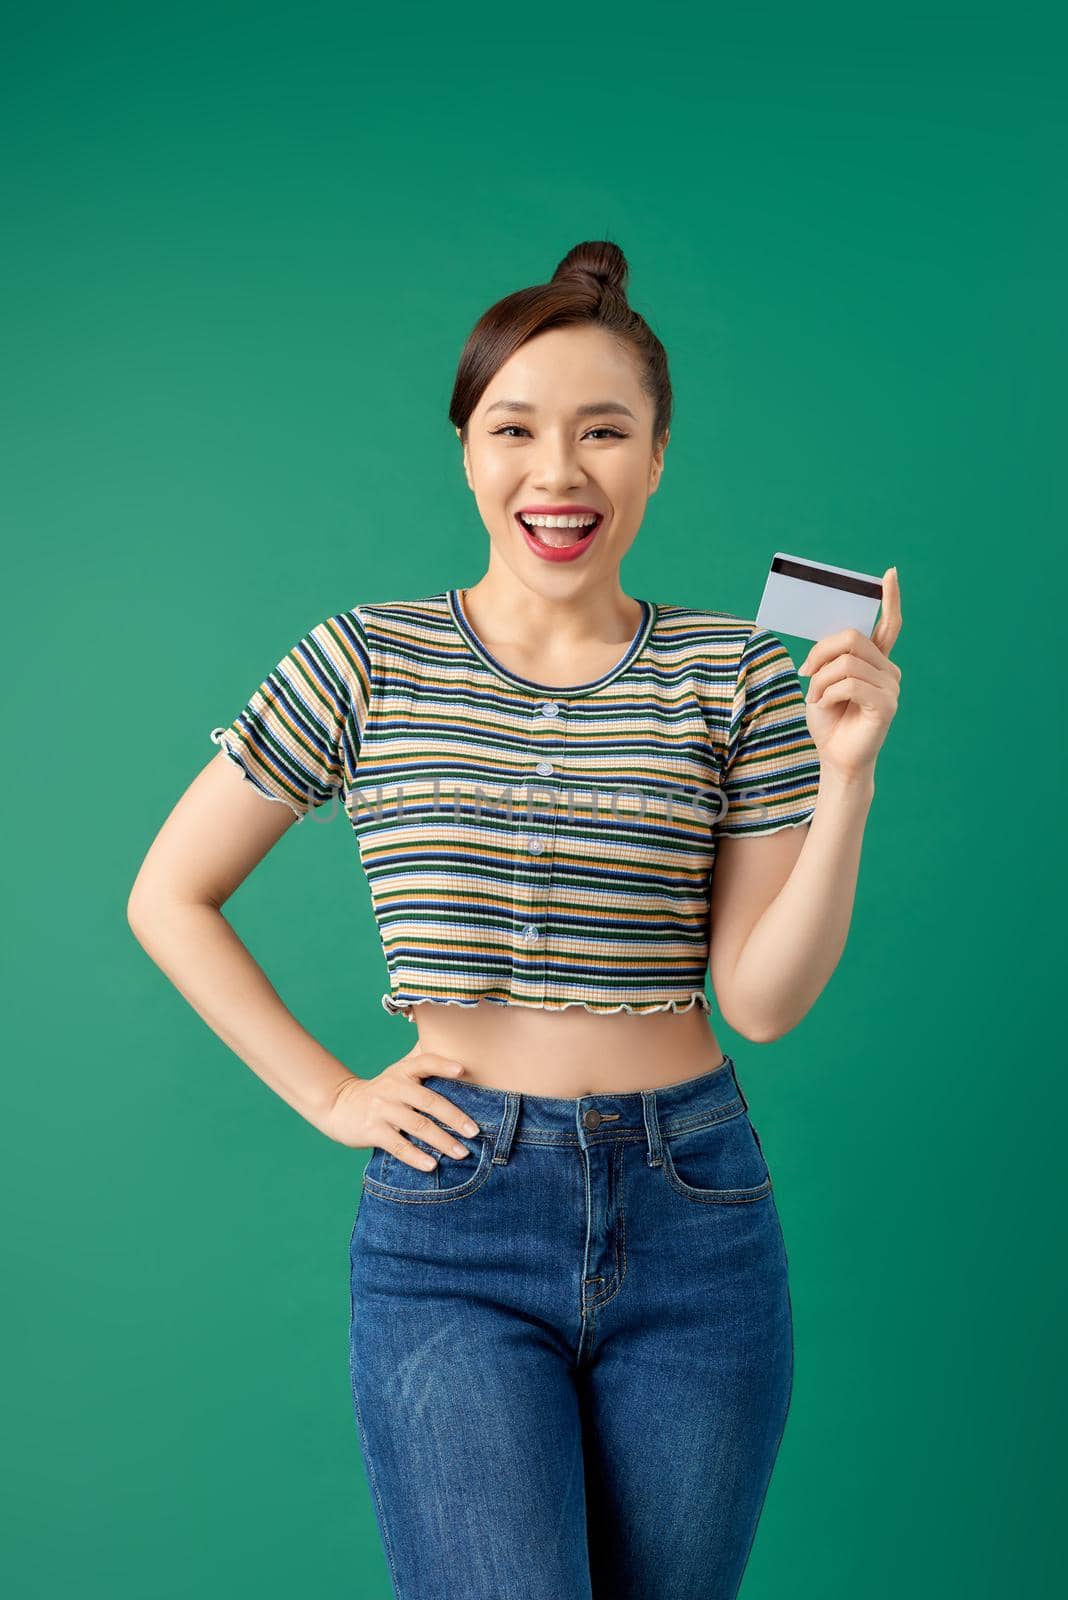 Portrait of smiling young Asian woman showing credit card over green background.